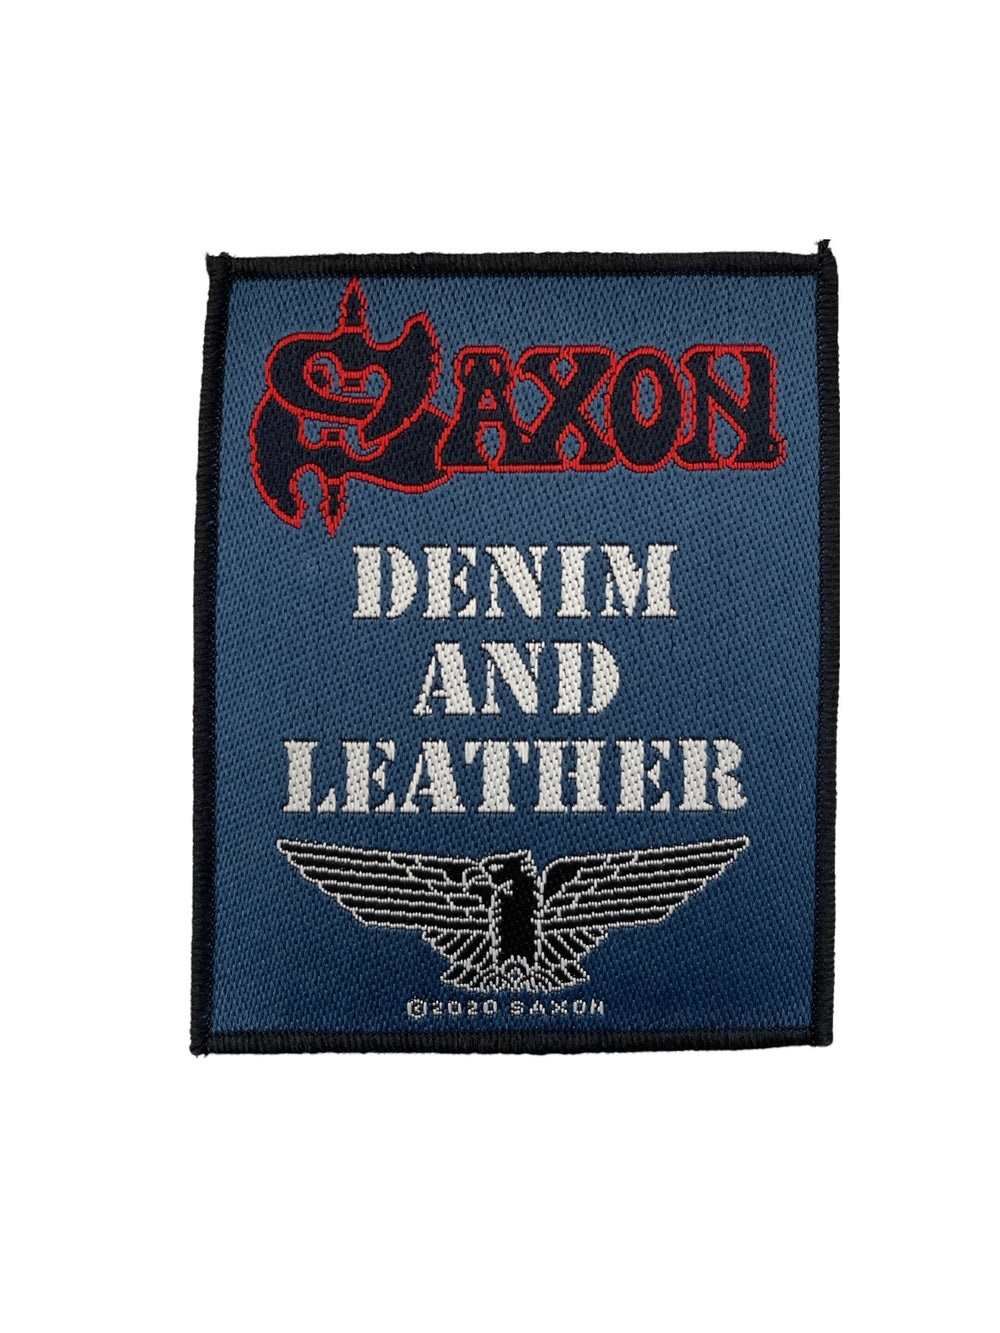 Saxon Standard Patch: Denim & Leather Official Woven Patch Brand New